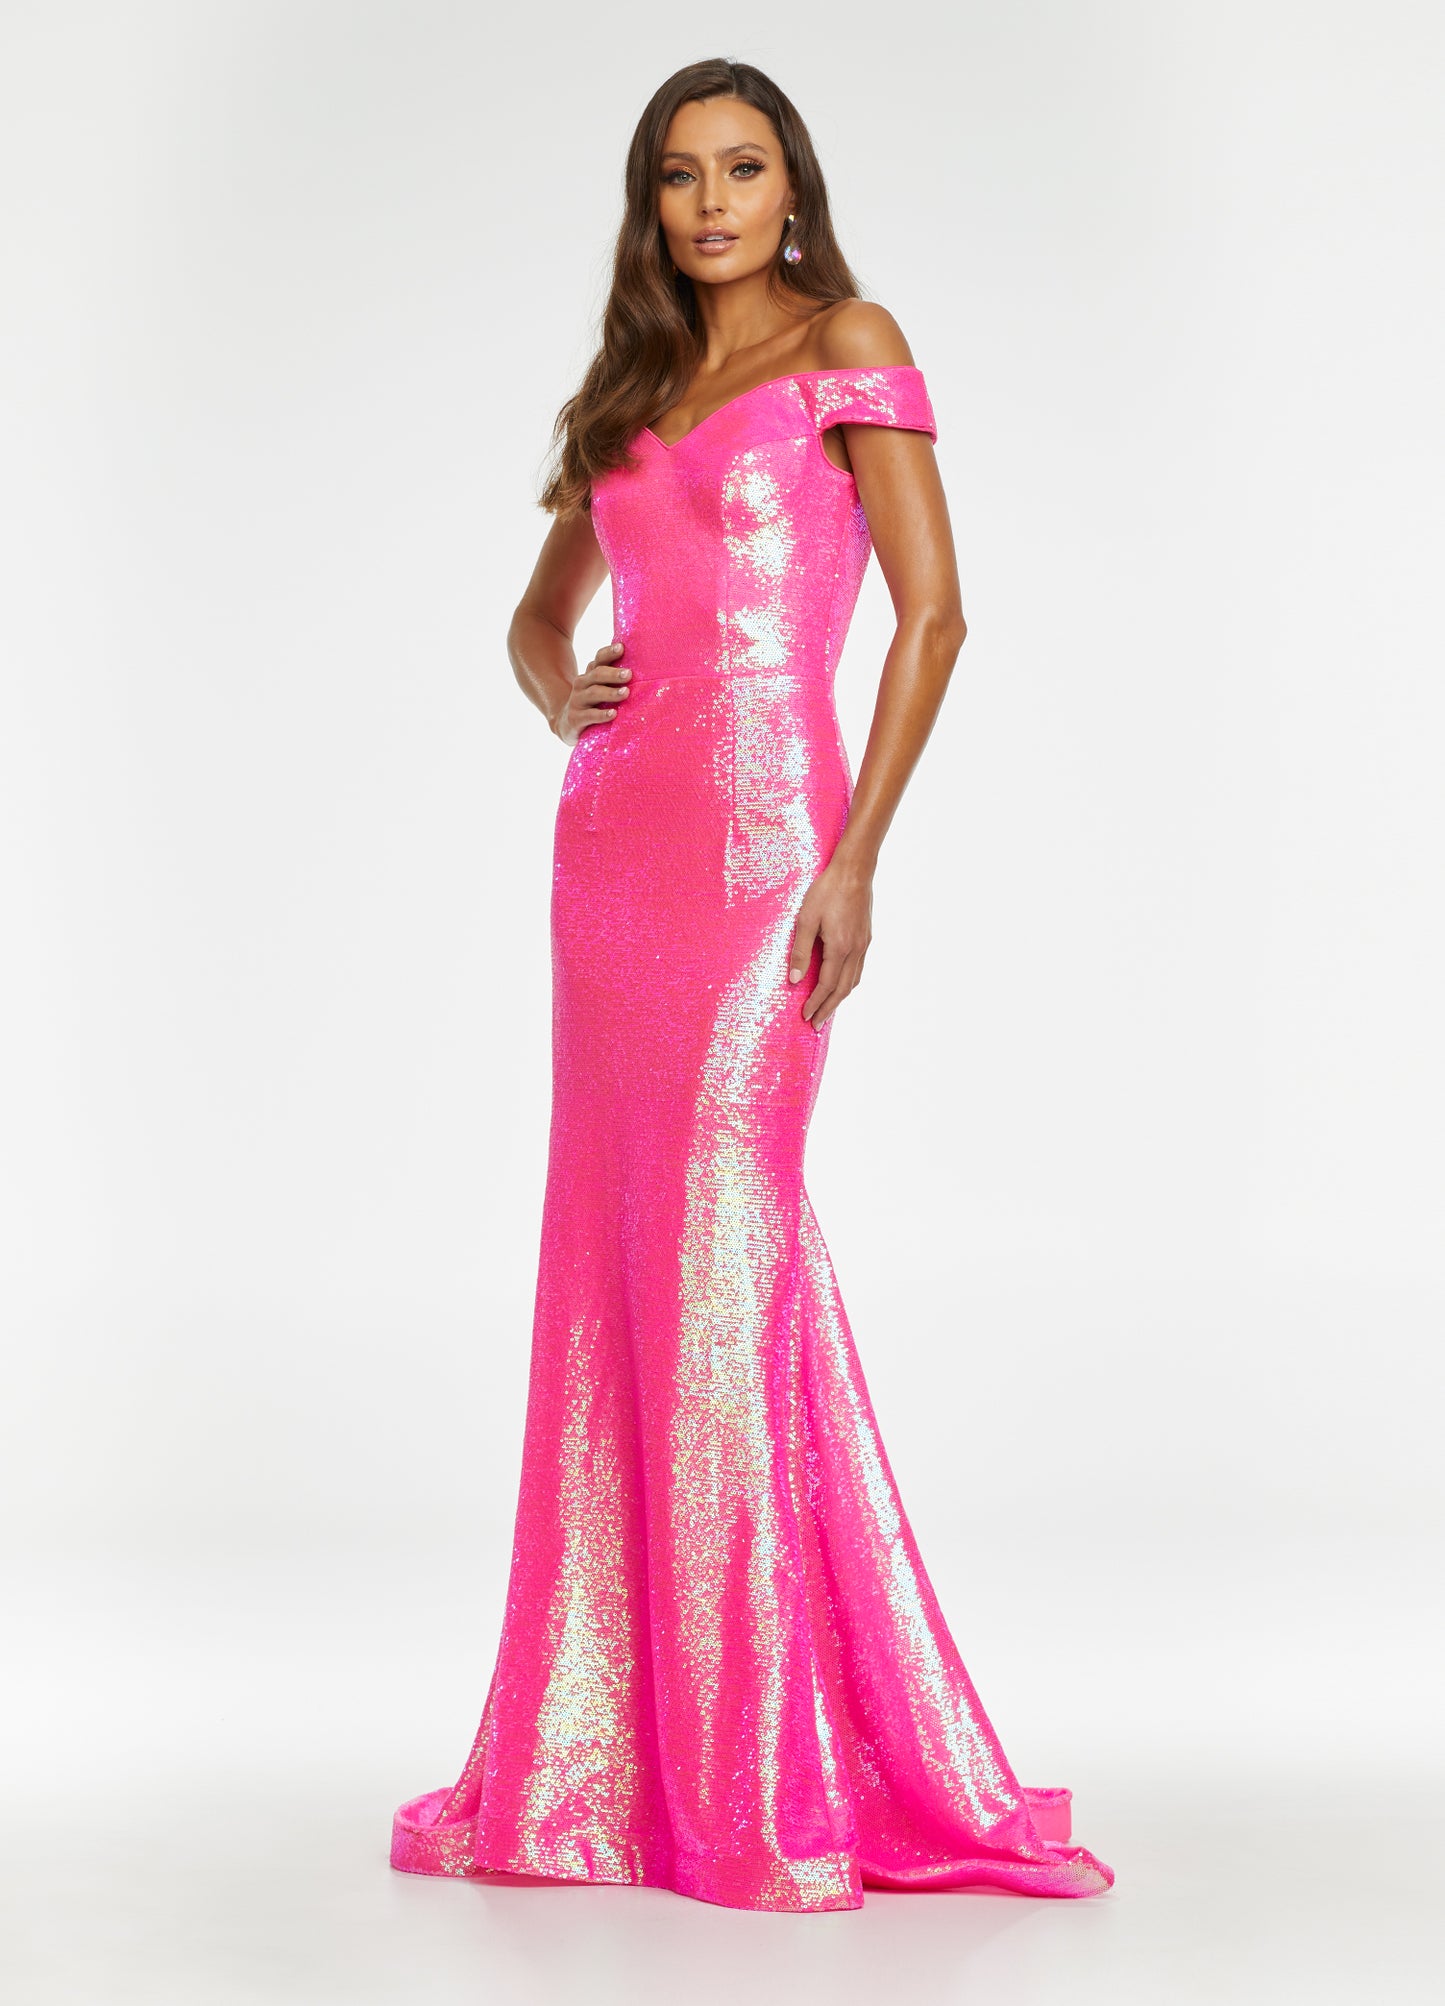 Ashley Lauren 11109 is a long fitted sequin formal prom & Pageant dress. Featuring off the shoulder straps and a lush trumpet skirt with a sweeping train.  Available Sizes: 16  Available Colors: Neon Pink